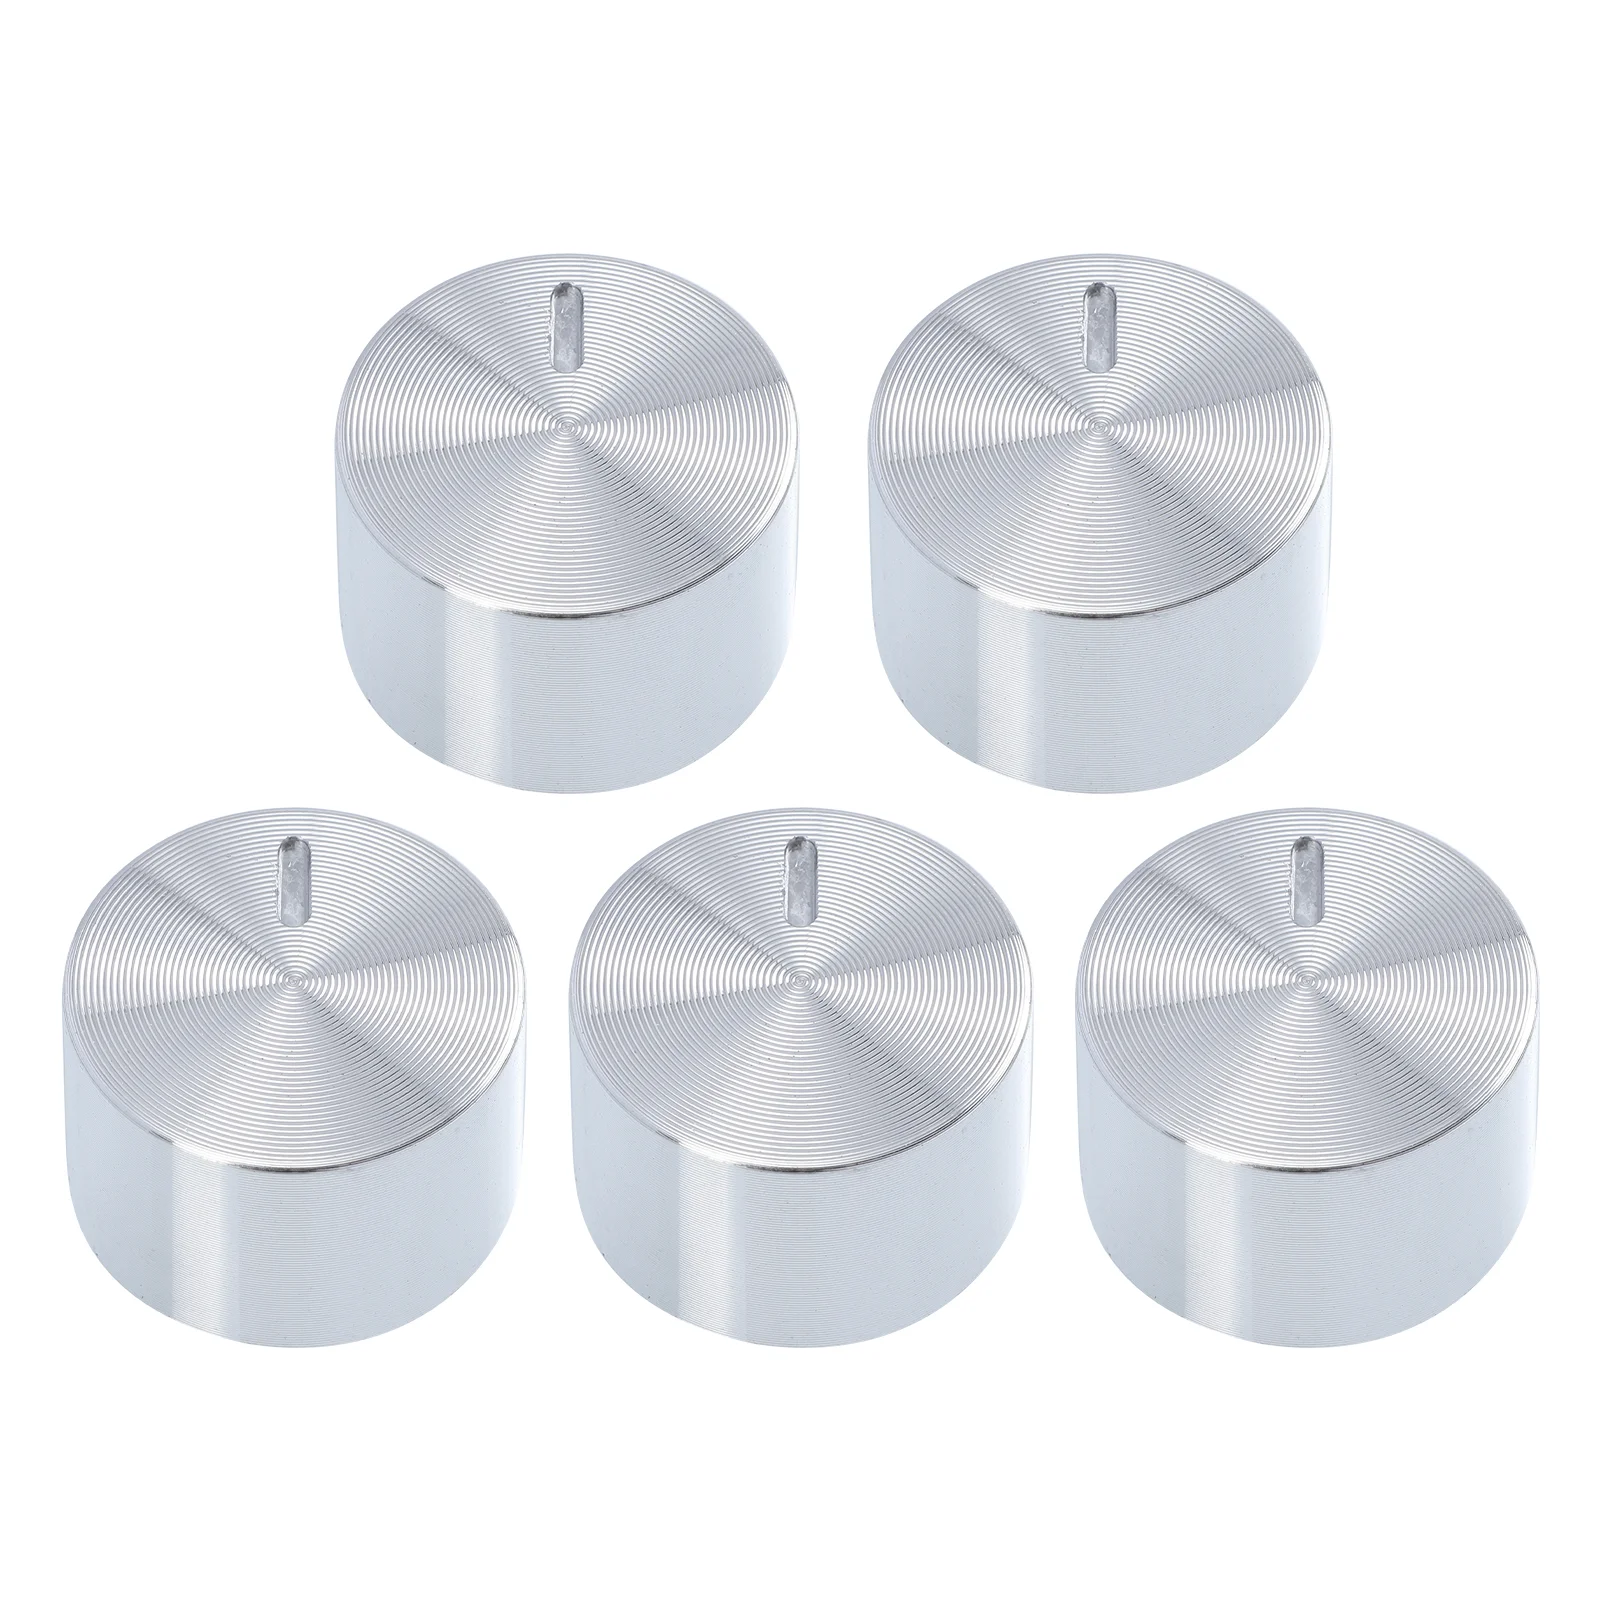 5Pcs Cooker Stove Control Knob Electric Cooktop Accessories Gas Stove Burner Gas Stove Knob Ignition Stove Knobs